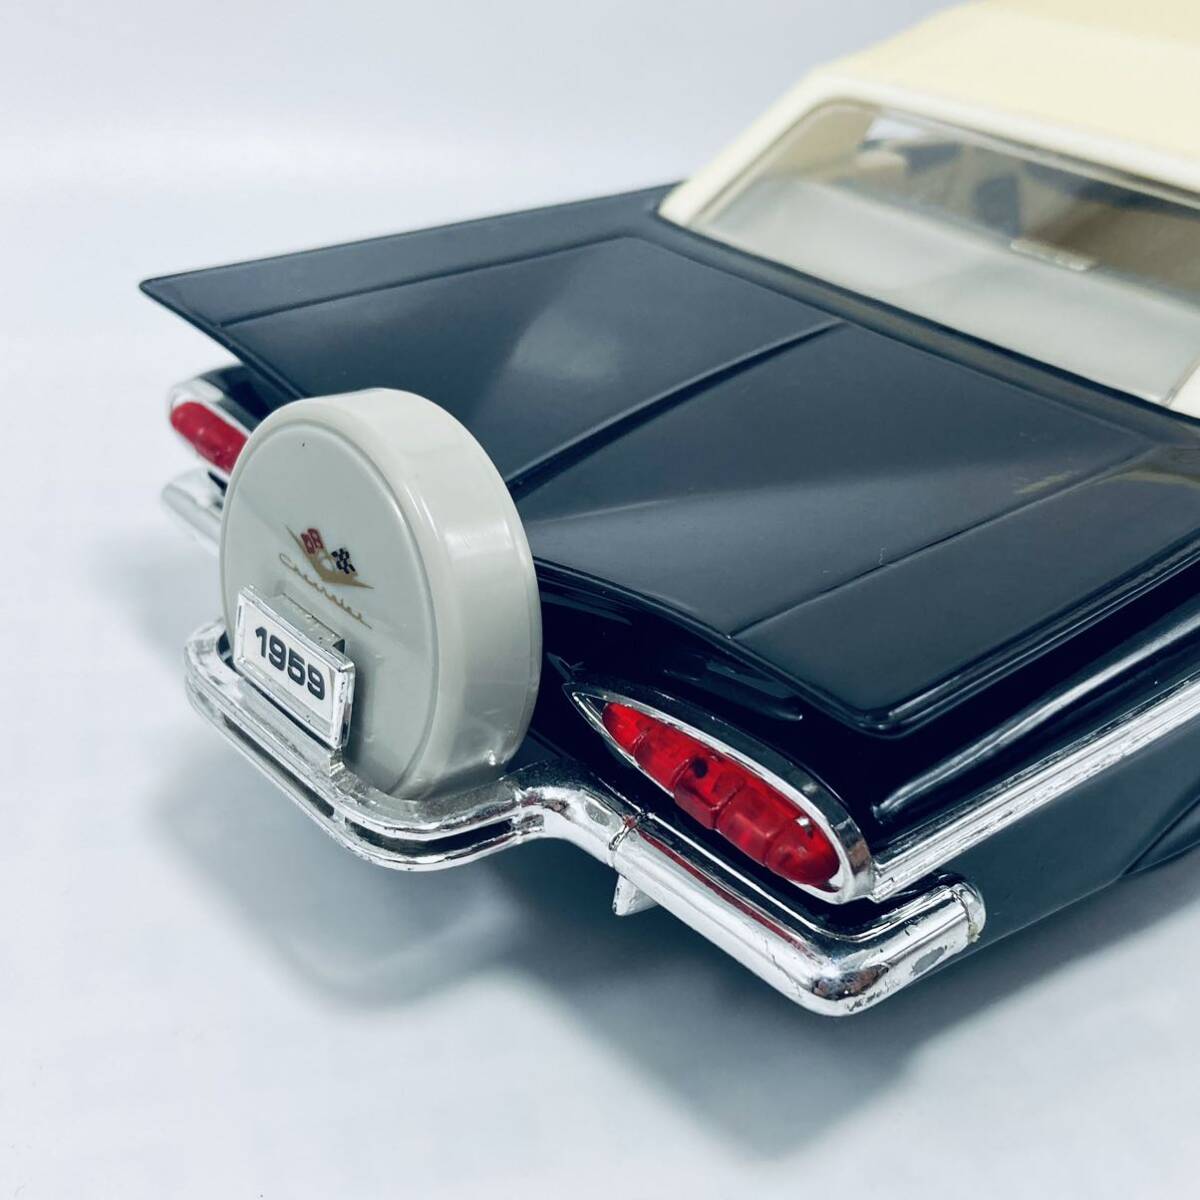  out of print goods YATMING 1/18 CHEVROLET IMPALA 1959 Chevrolet Impala outer spare tire housing specification BLACK